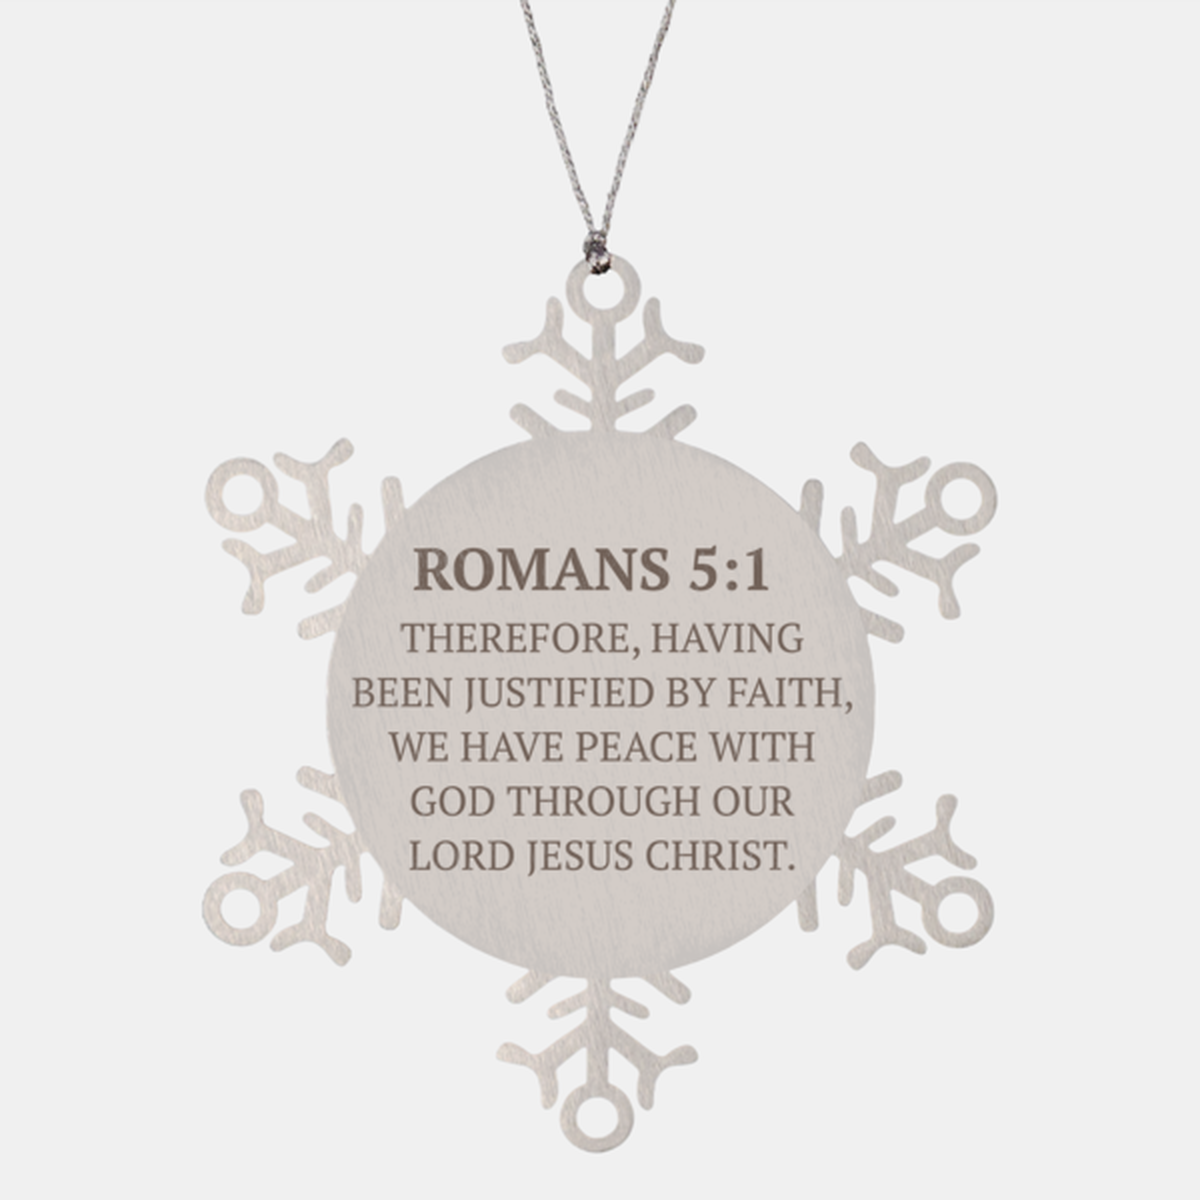 Christian Ornaments For Christmas Tree, Therefore, Having Been Justified By Faith, Religious Christmas Decorations, Scripture Ornaments Gifts, Bible Verse Ornament